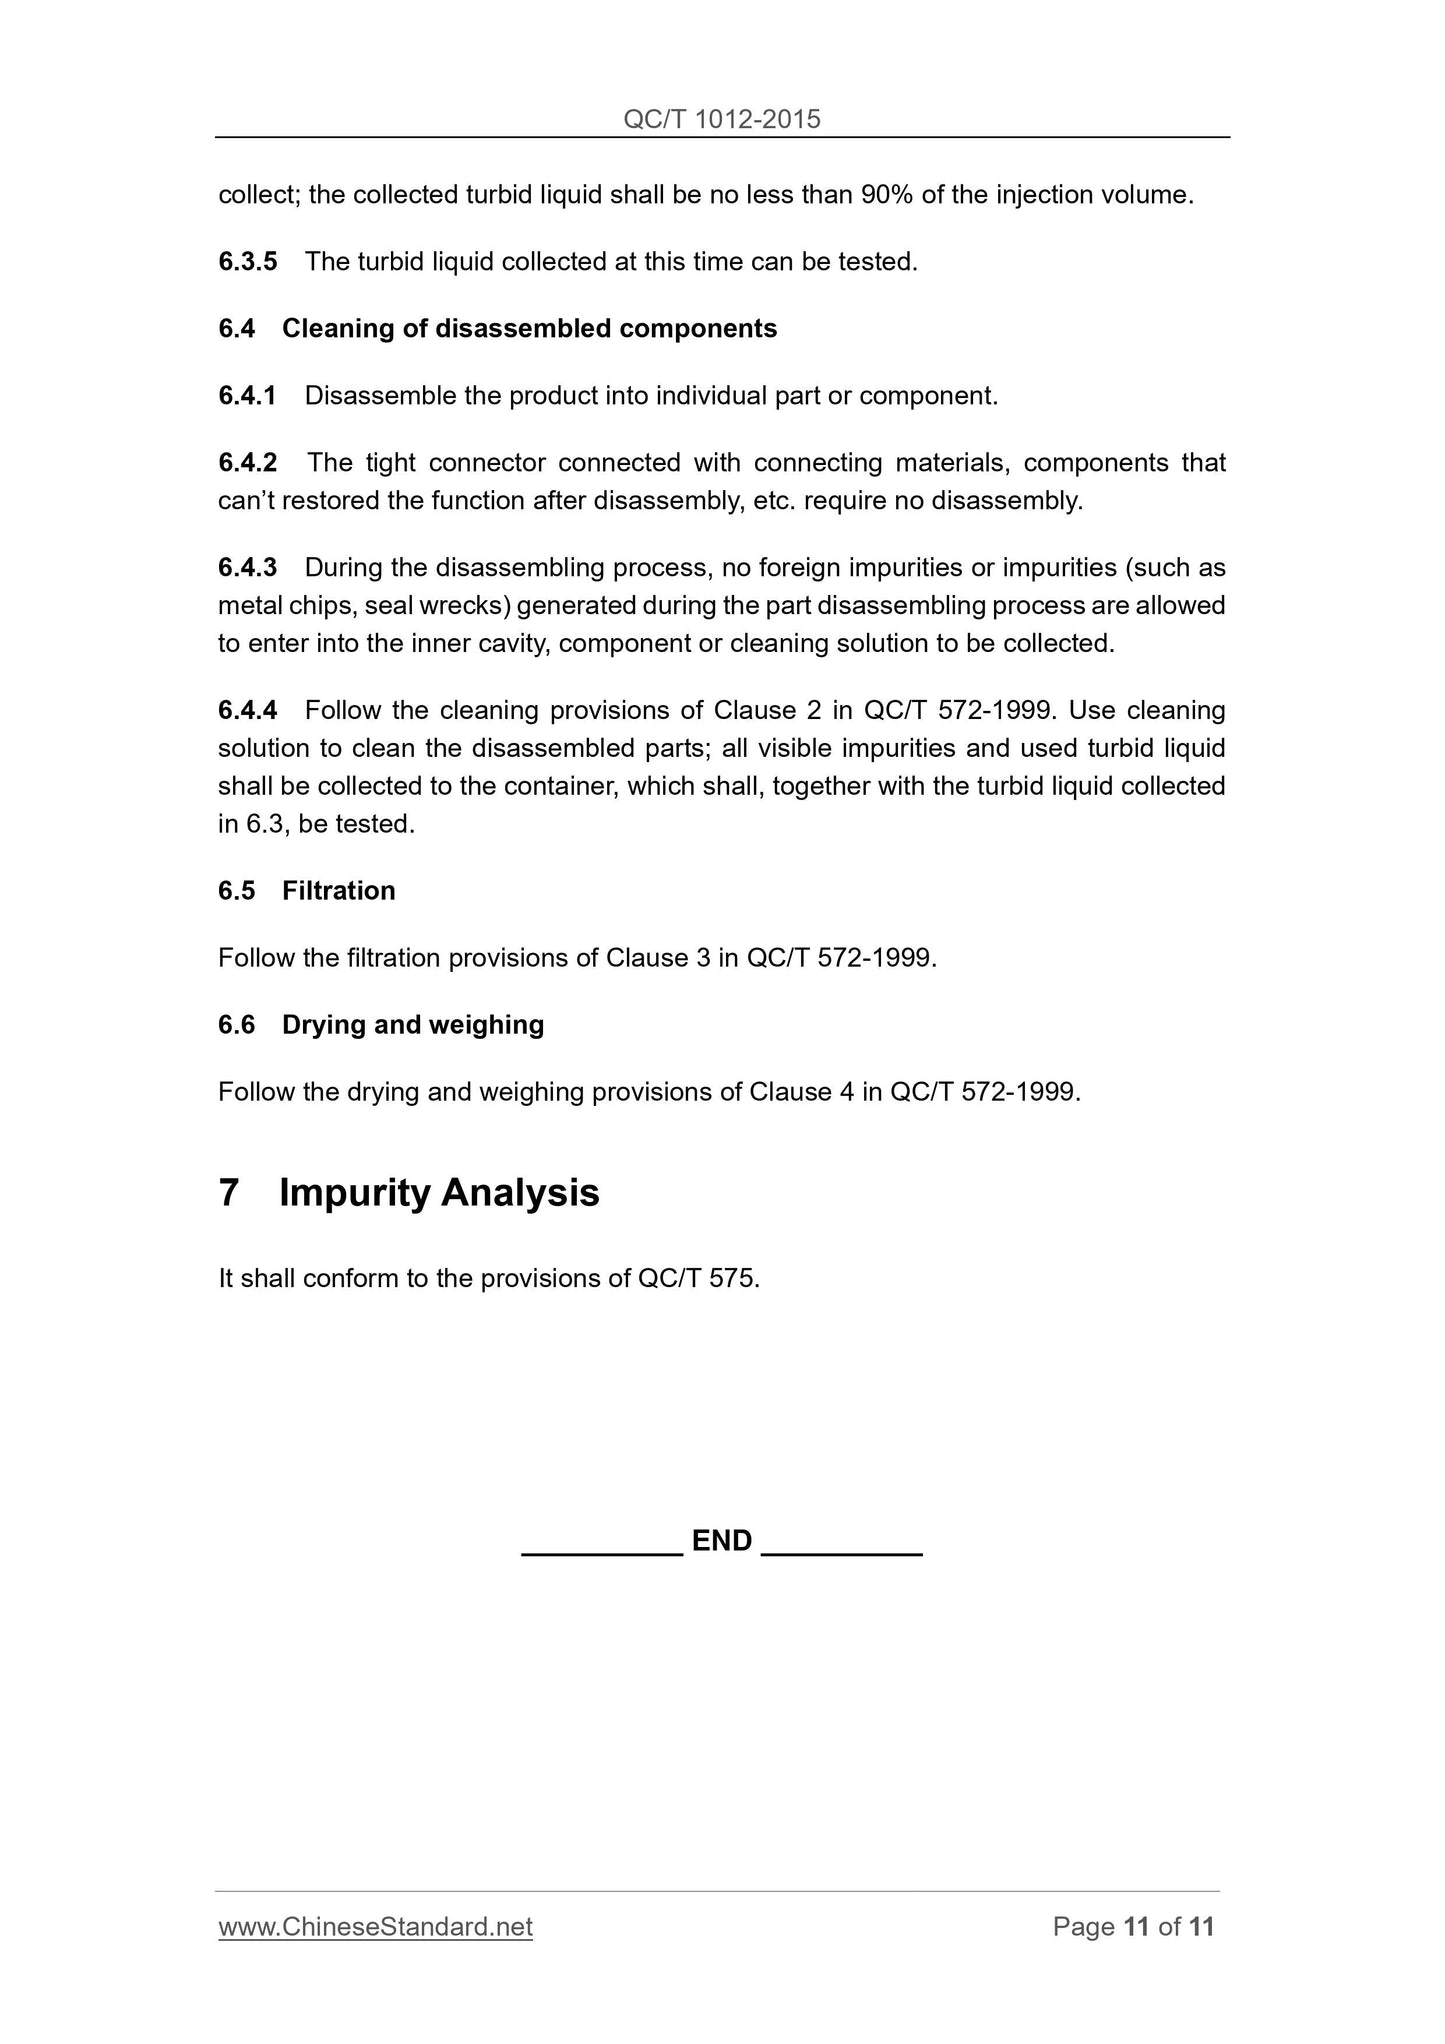 QC/T 1012-2015 Page 11